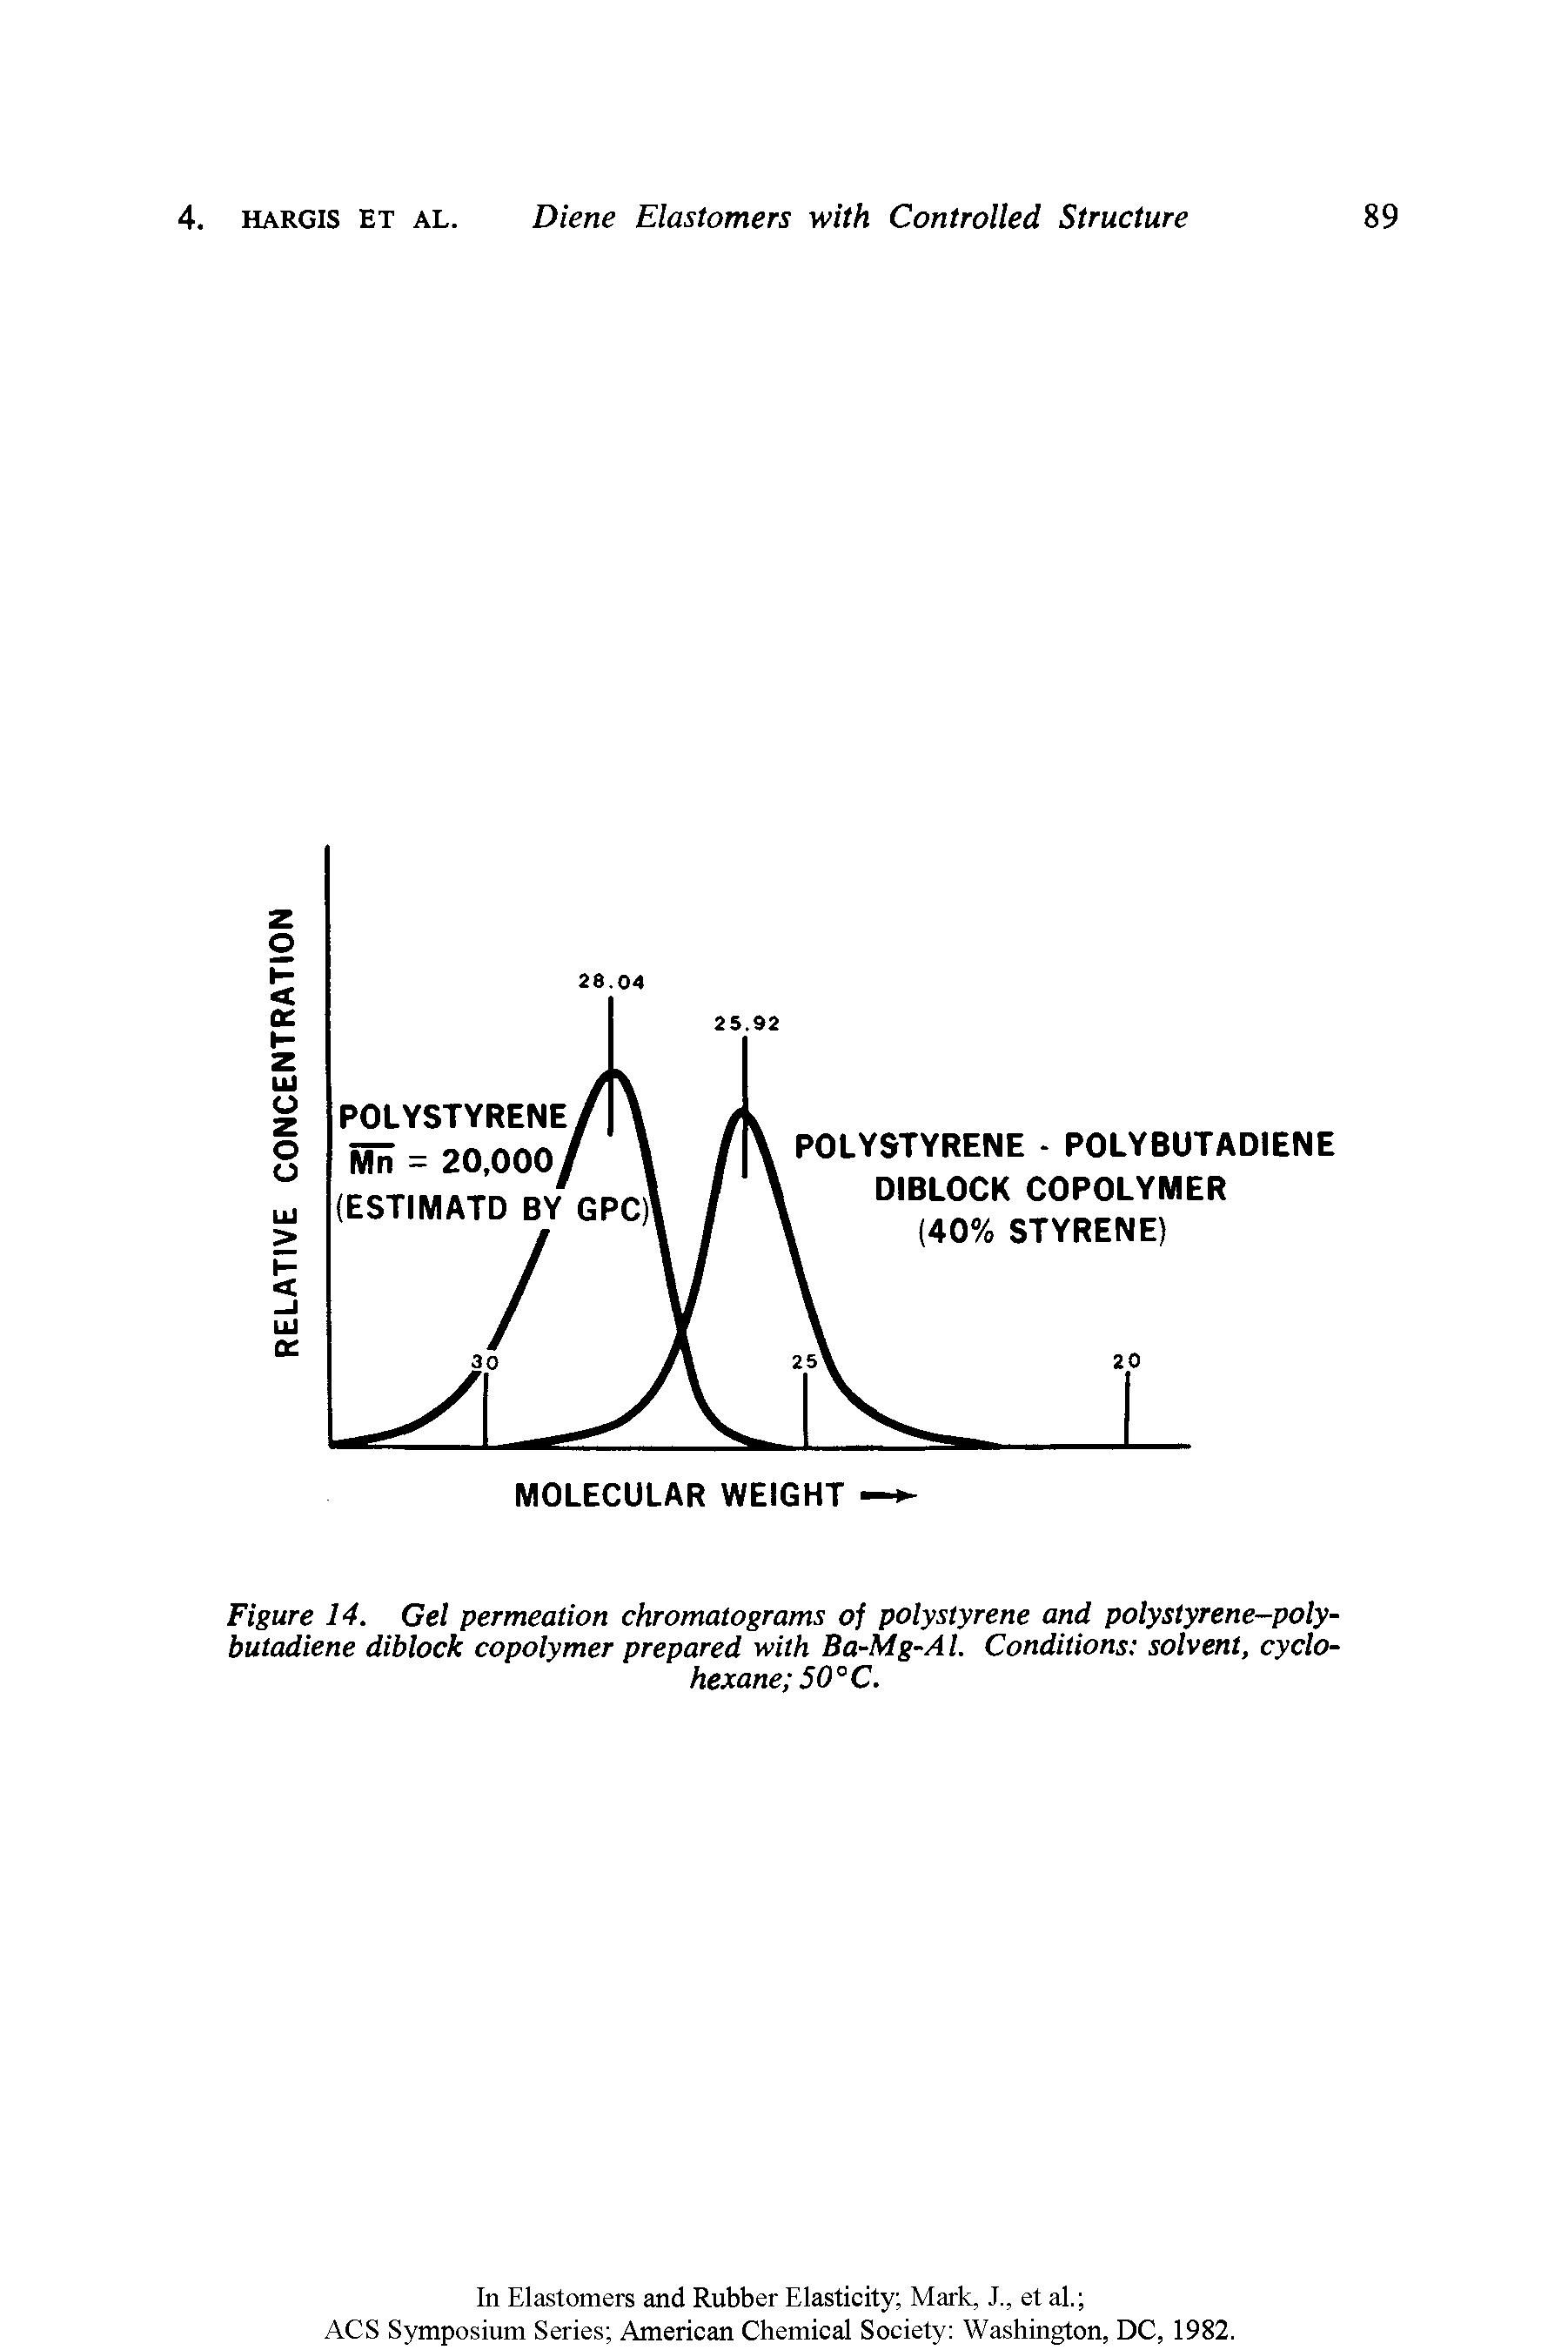 Figure 14. Gel permeation chromatograms of polystyrene and polystyrene-polybutadiene diblock copolymer prepared with Ba-Mg-Al. Conditions solvent, cyclohexane 50° C.